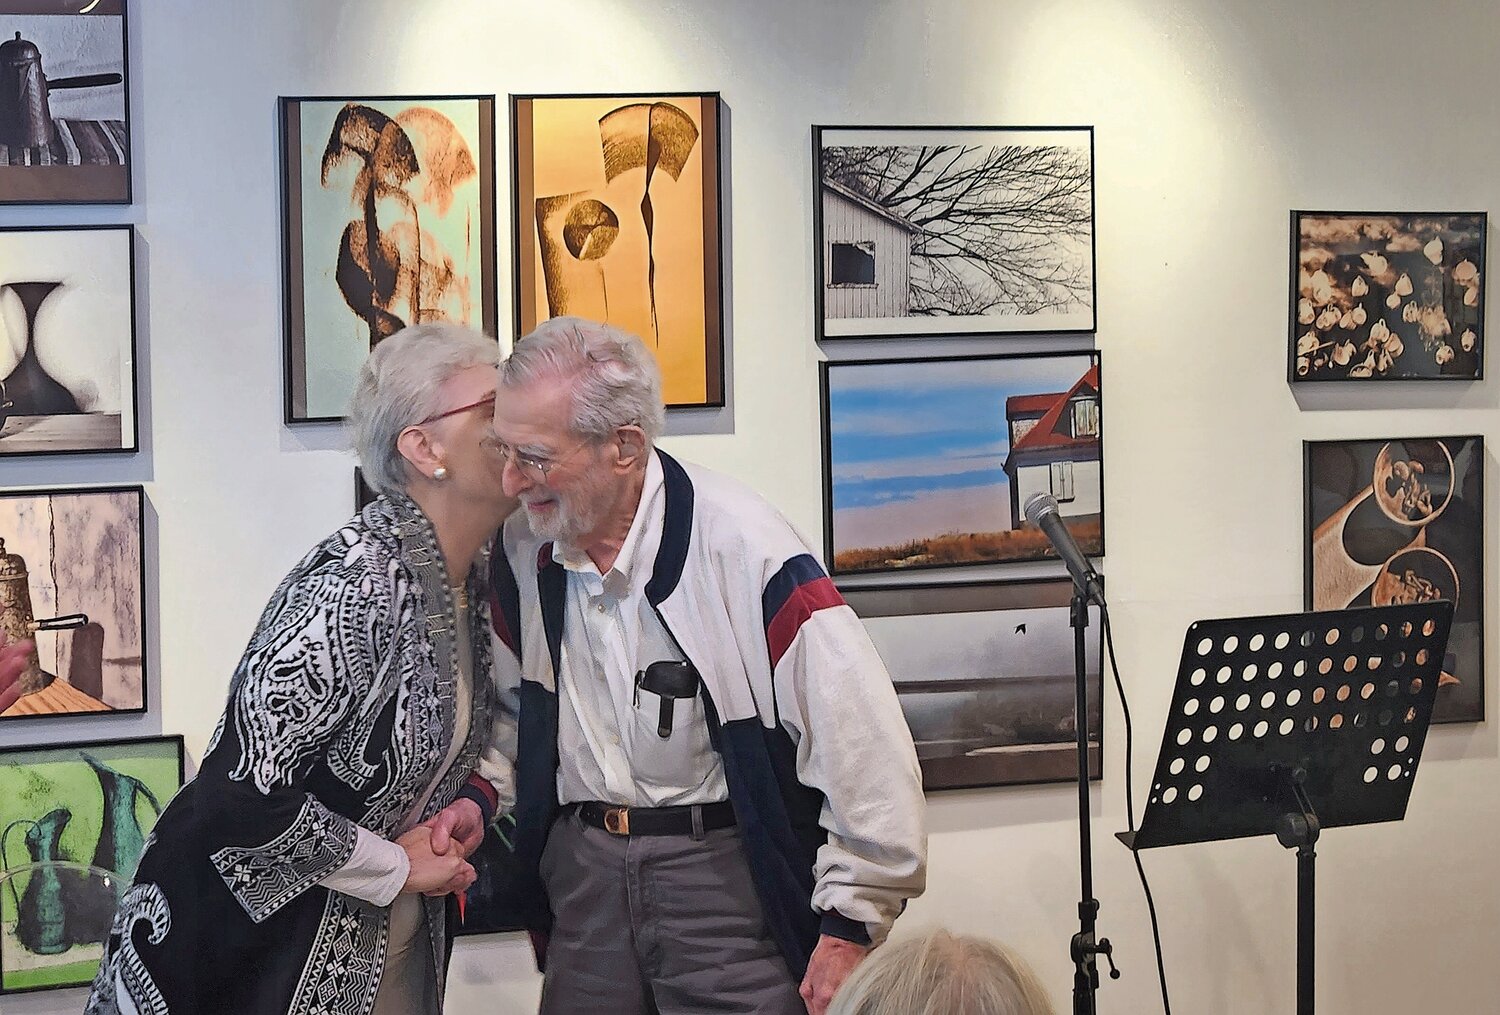 Victoria Bjorklund, left, and George Strausman, two of the 13 poets who took Evelyn Kandel’s long-standing poetry class, congratulate each other after reading their respective poems at the Sea Cliff Arts Council.